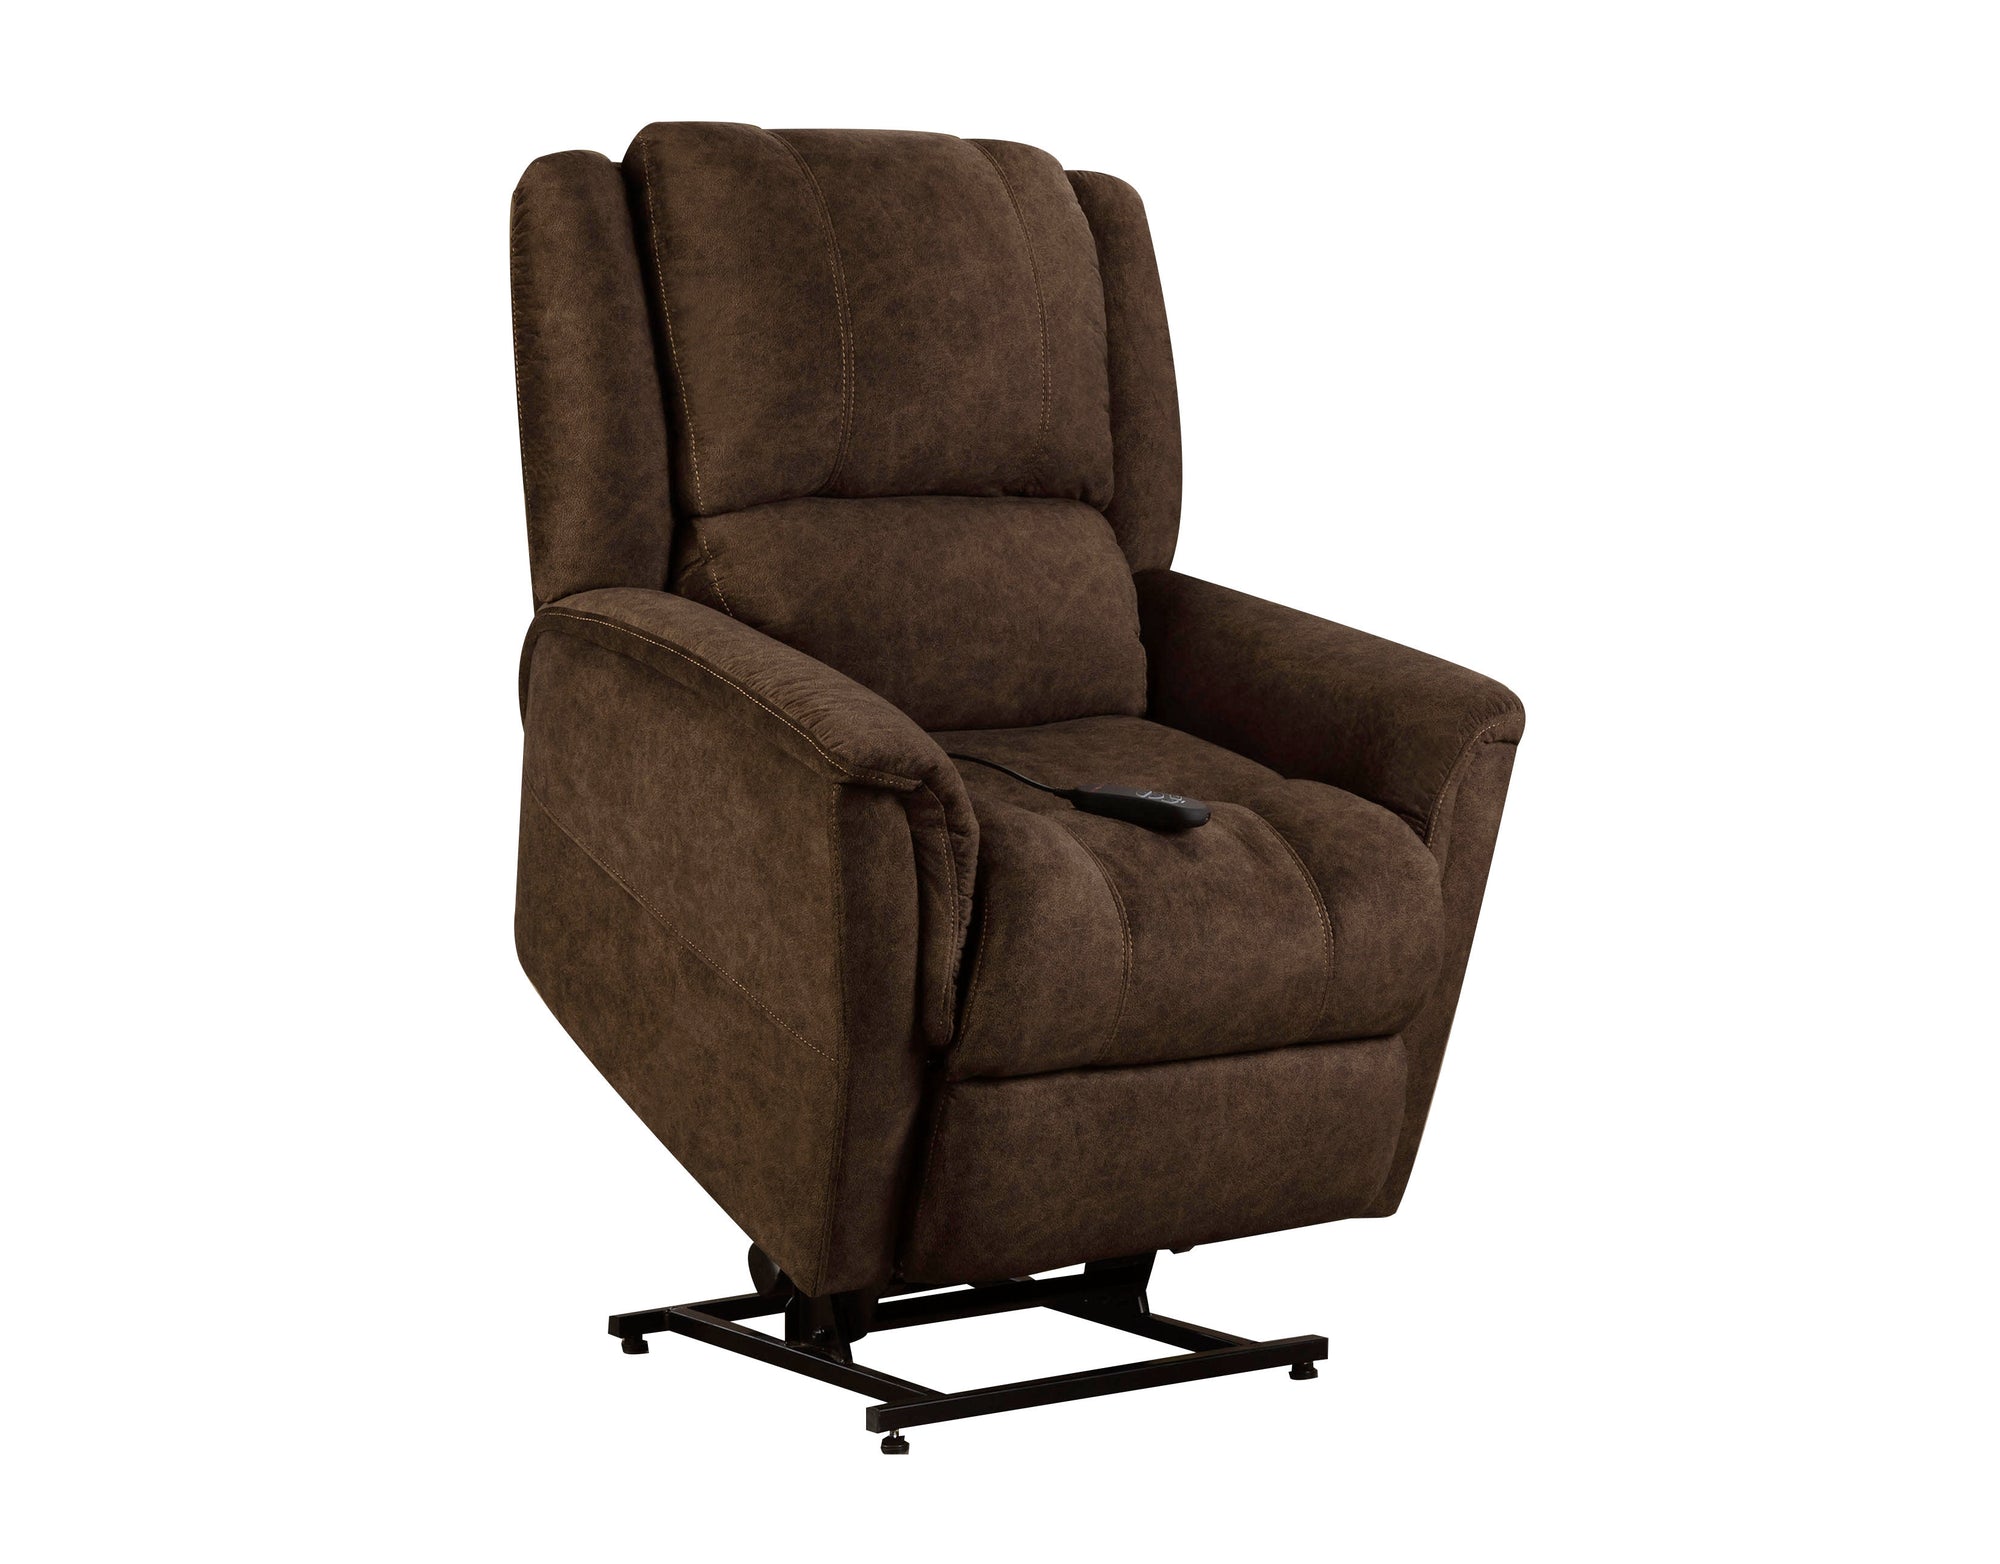 REDUCED PRICE Viper Two Motor Lift Chair (172) in Stonebrook Carob